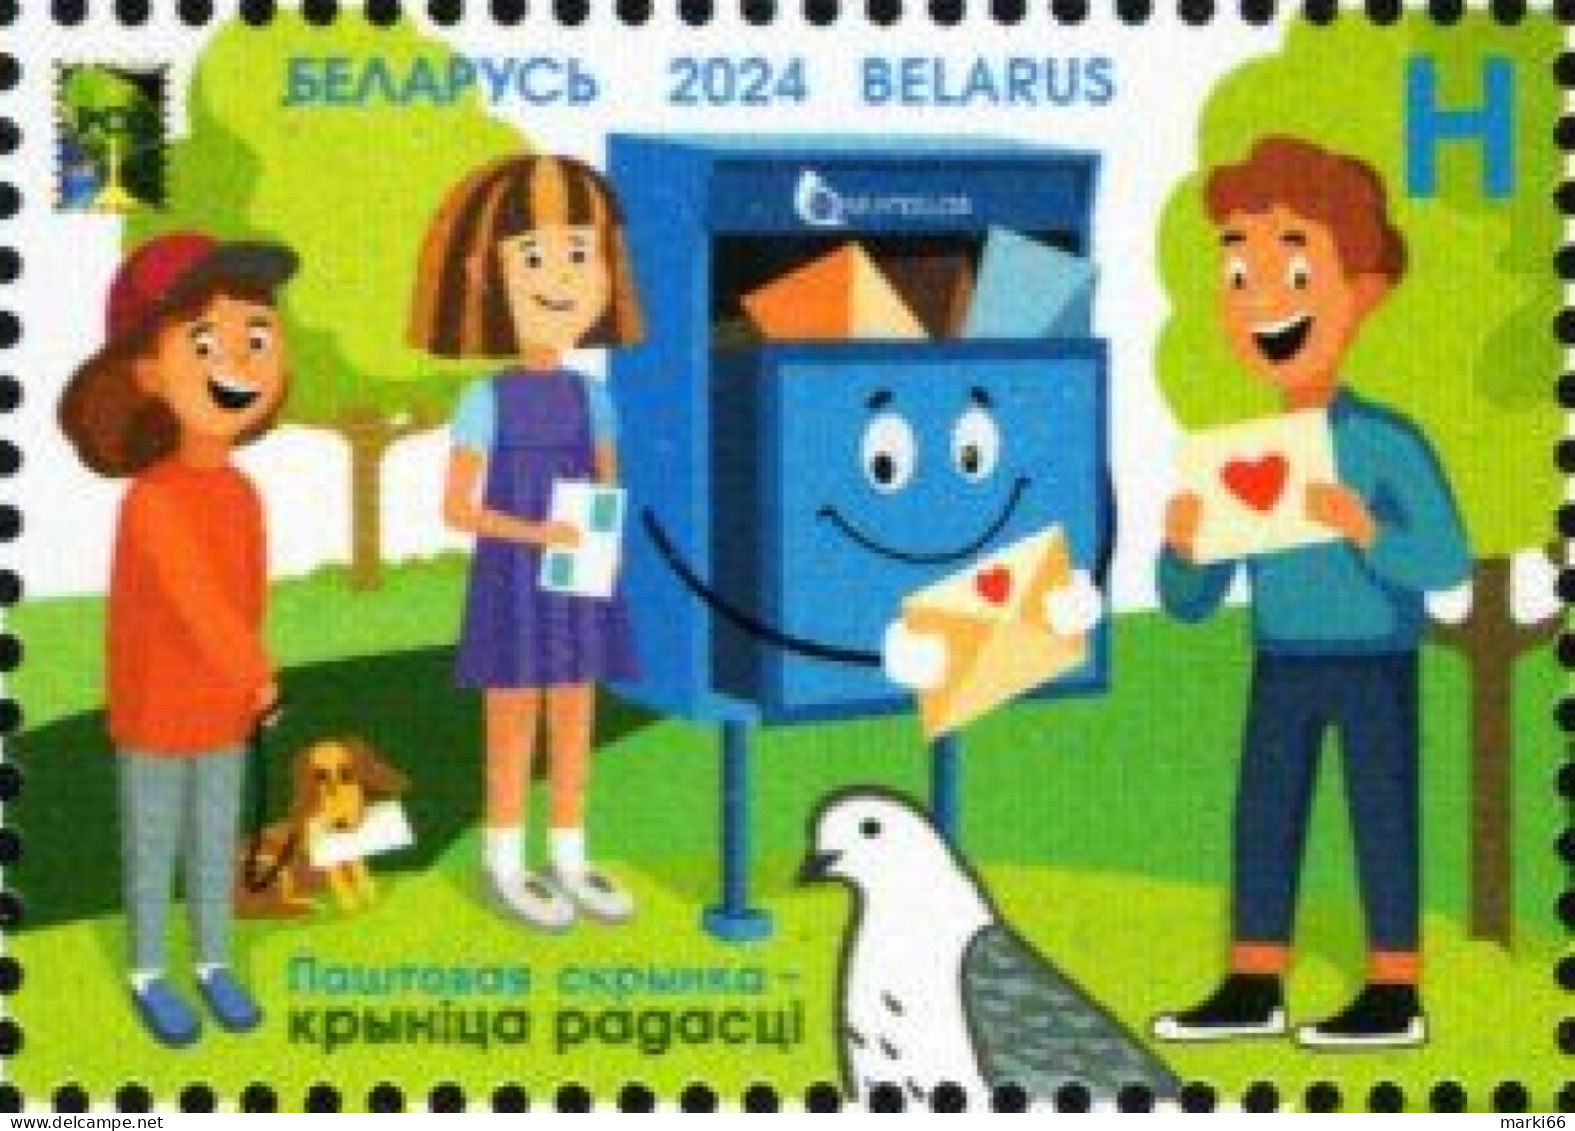 Belarus - 2024 - Postboxes - RCC Common Issue - Mint Stamp - Bielorussia